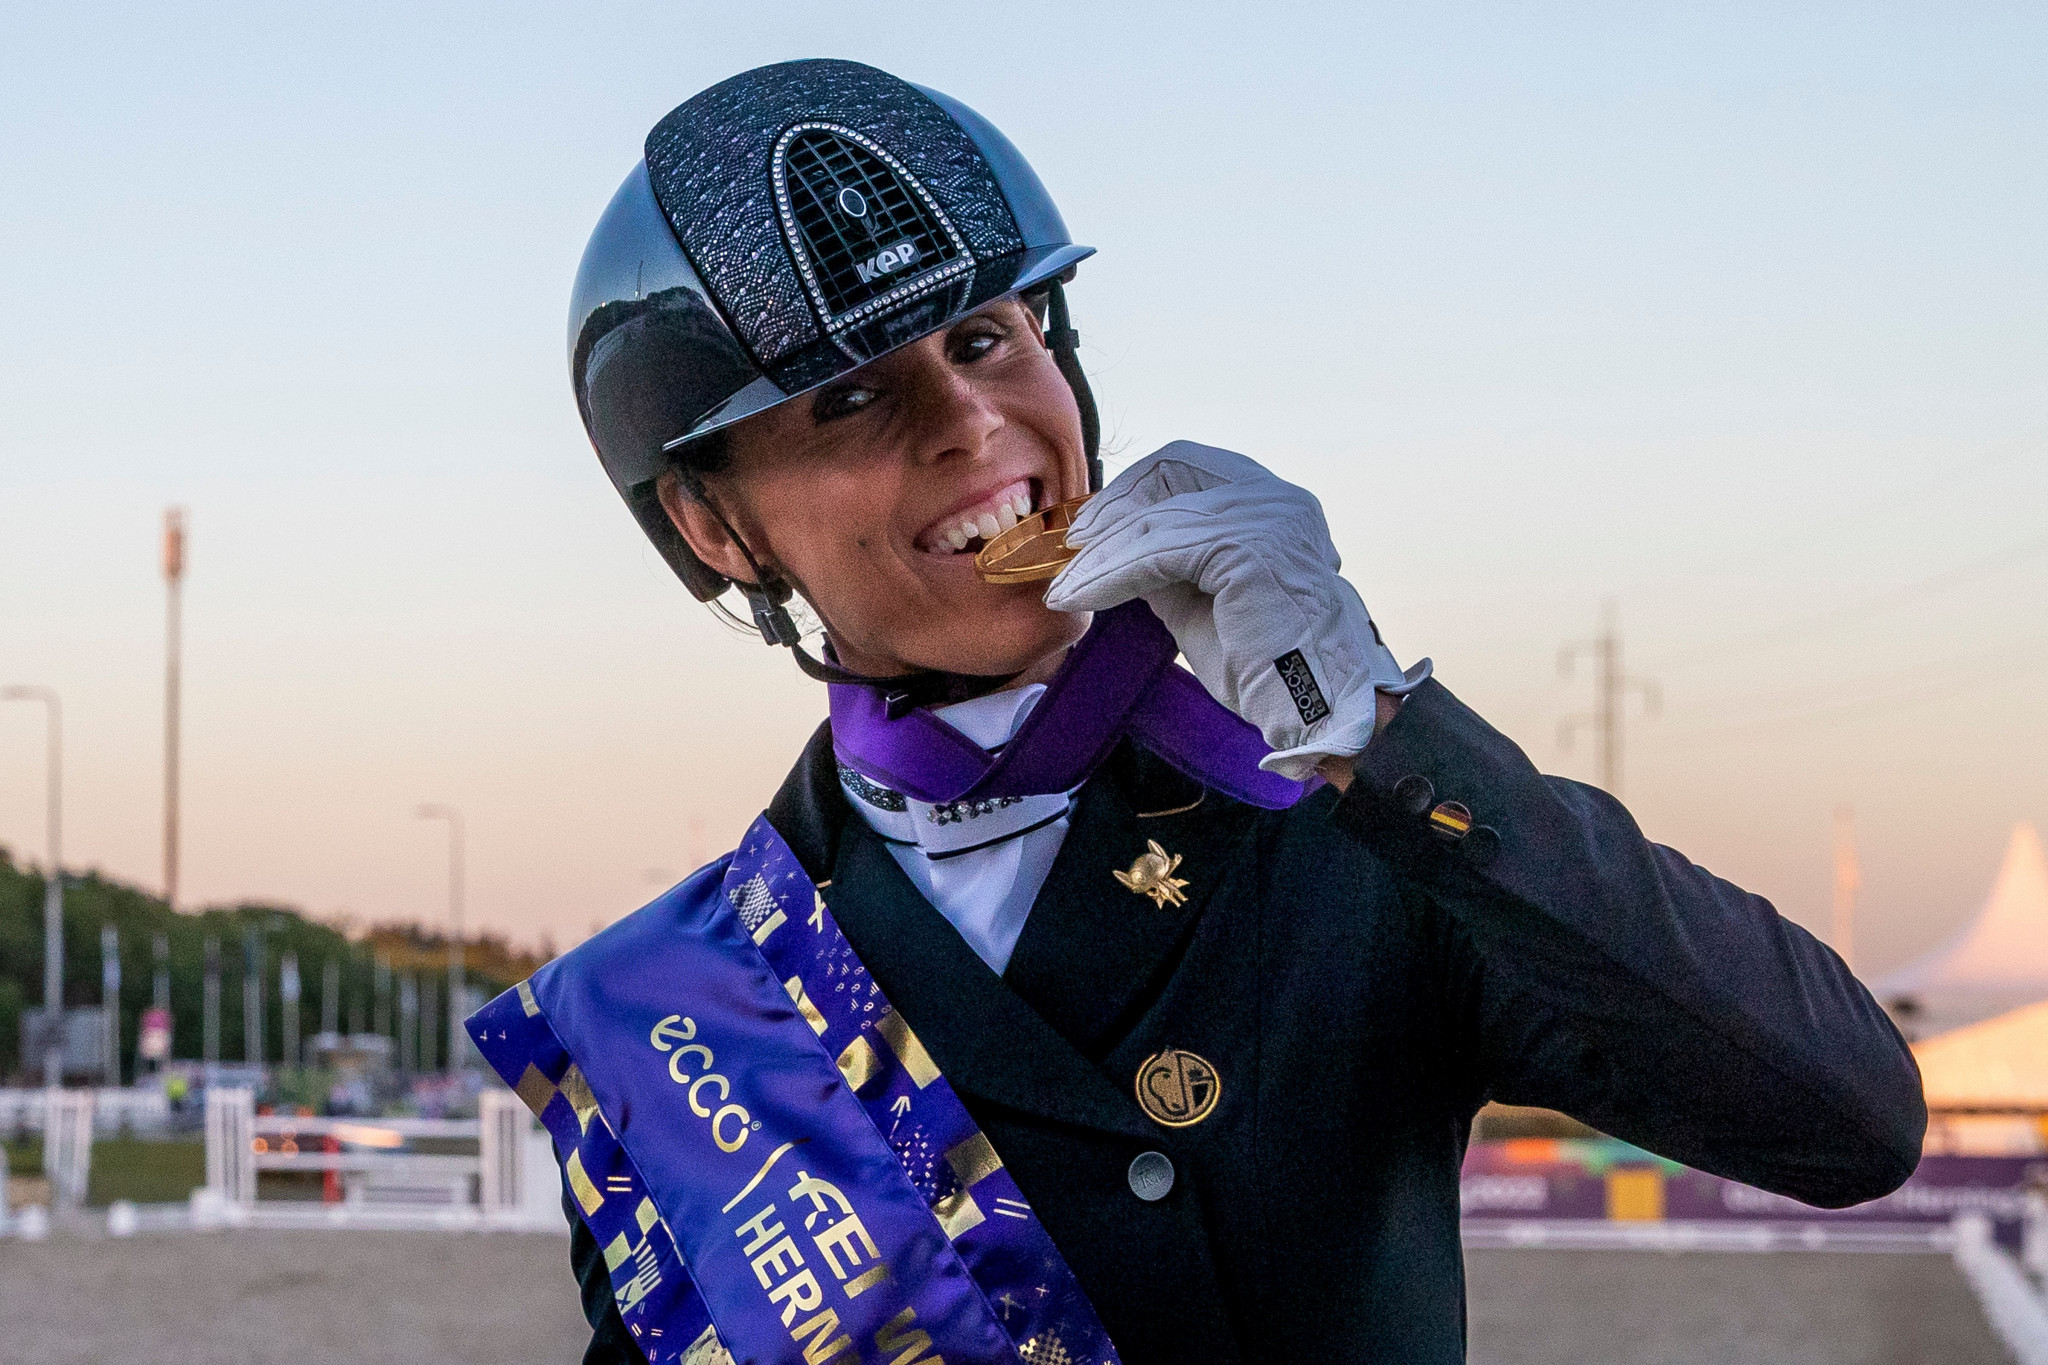 George brings home Para dressage gold for Belgium at FEI World Championships